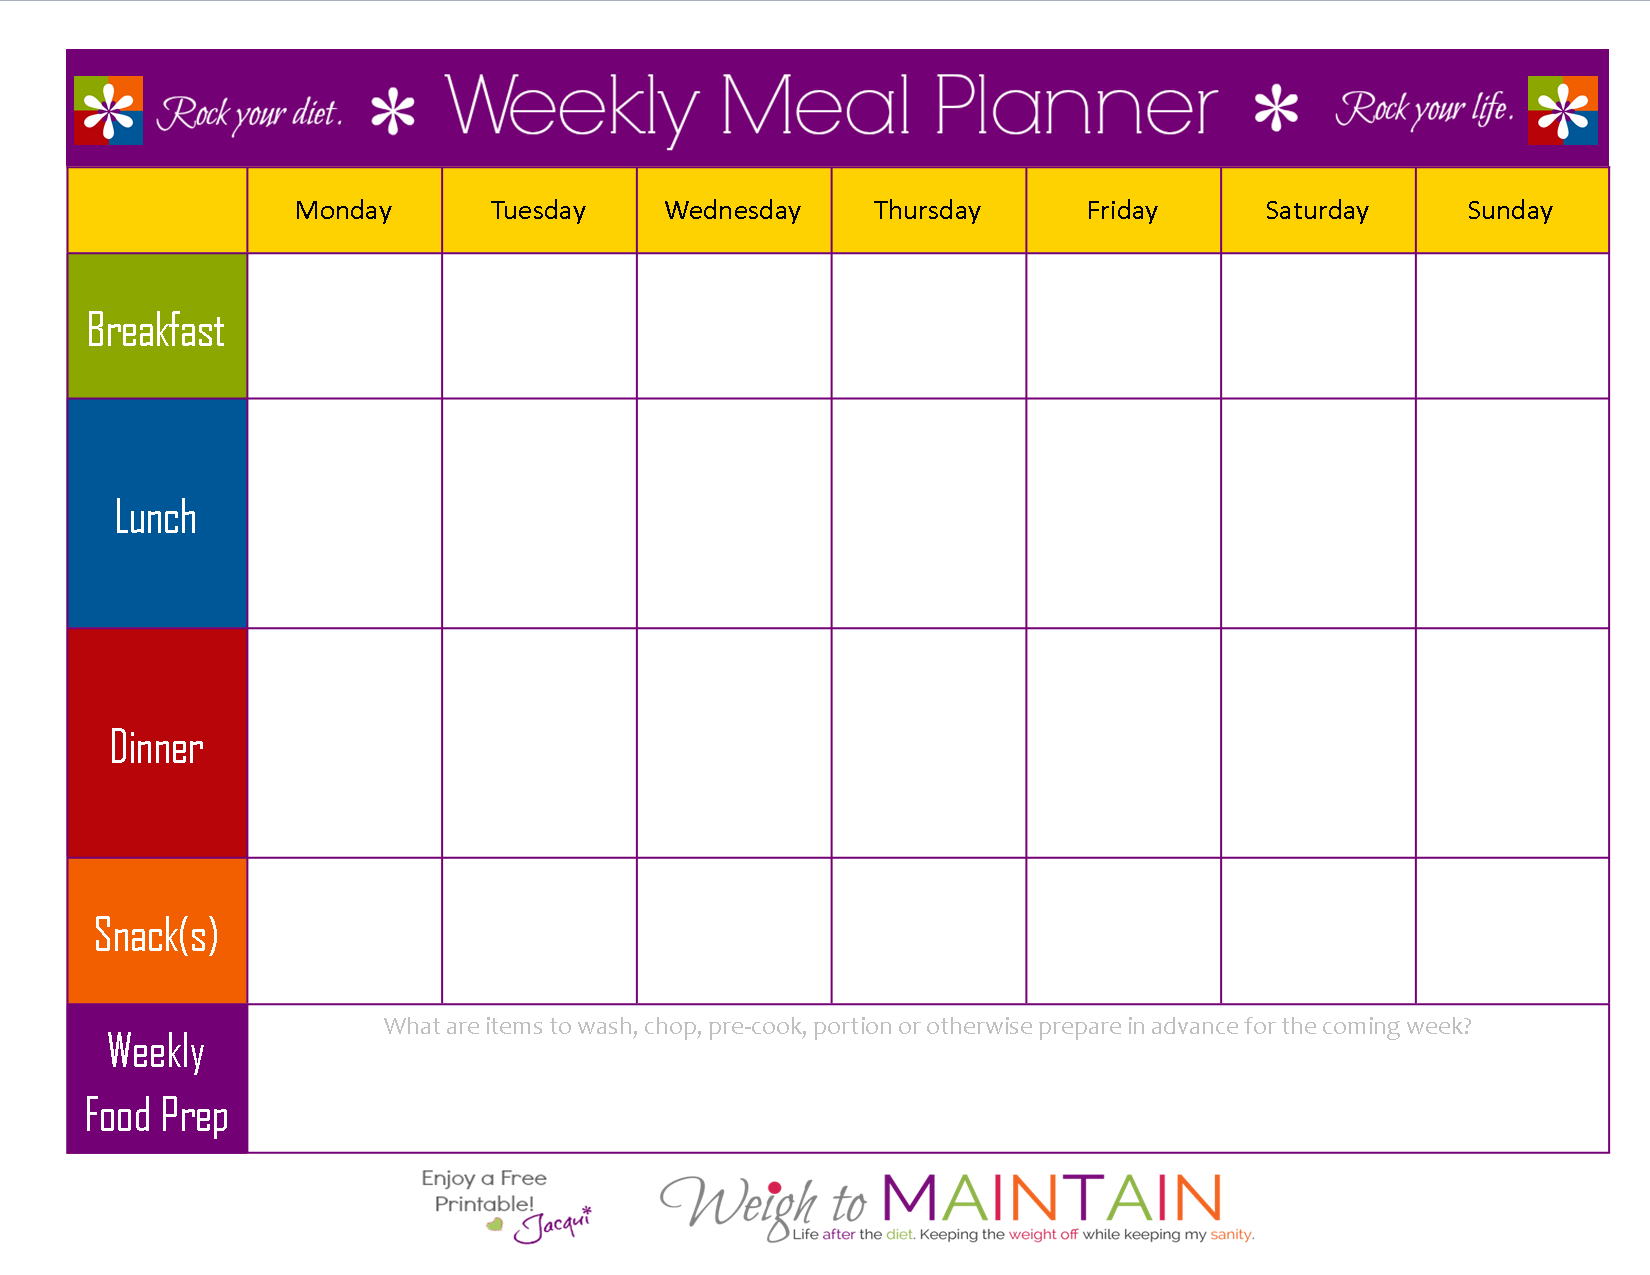 Keto Meal Plan Spreadsheet With Meal Planning So Simple Even A Gym Bro Can Do It – With Printables